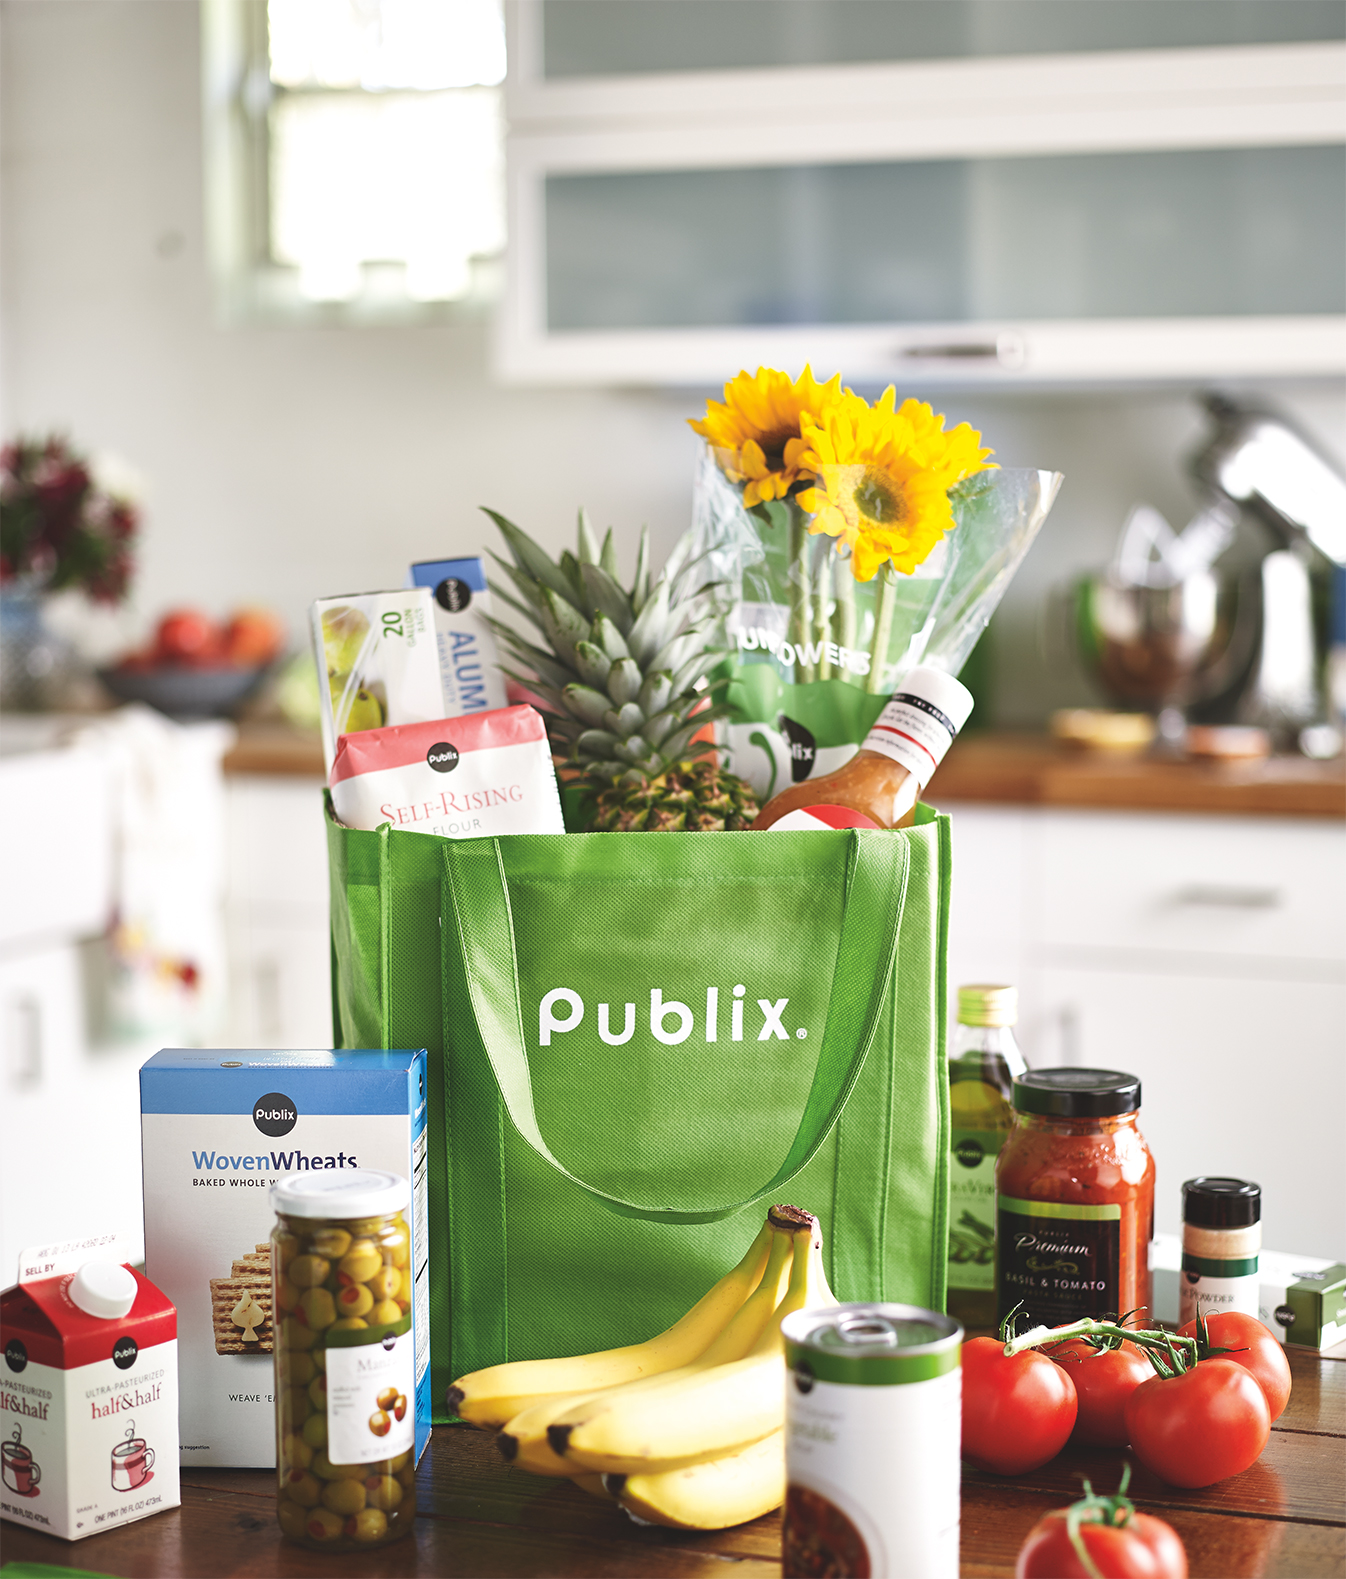 Publix reusable back filled with groceries